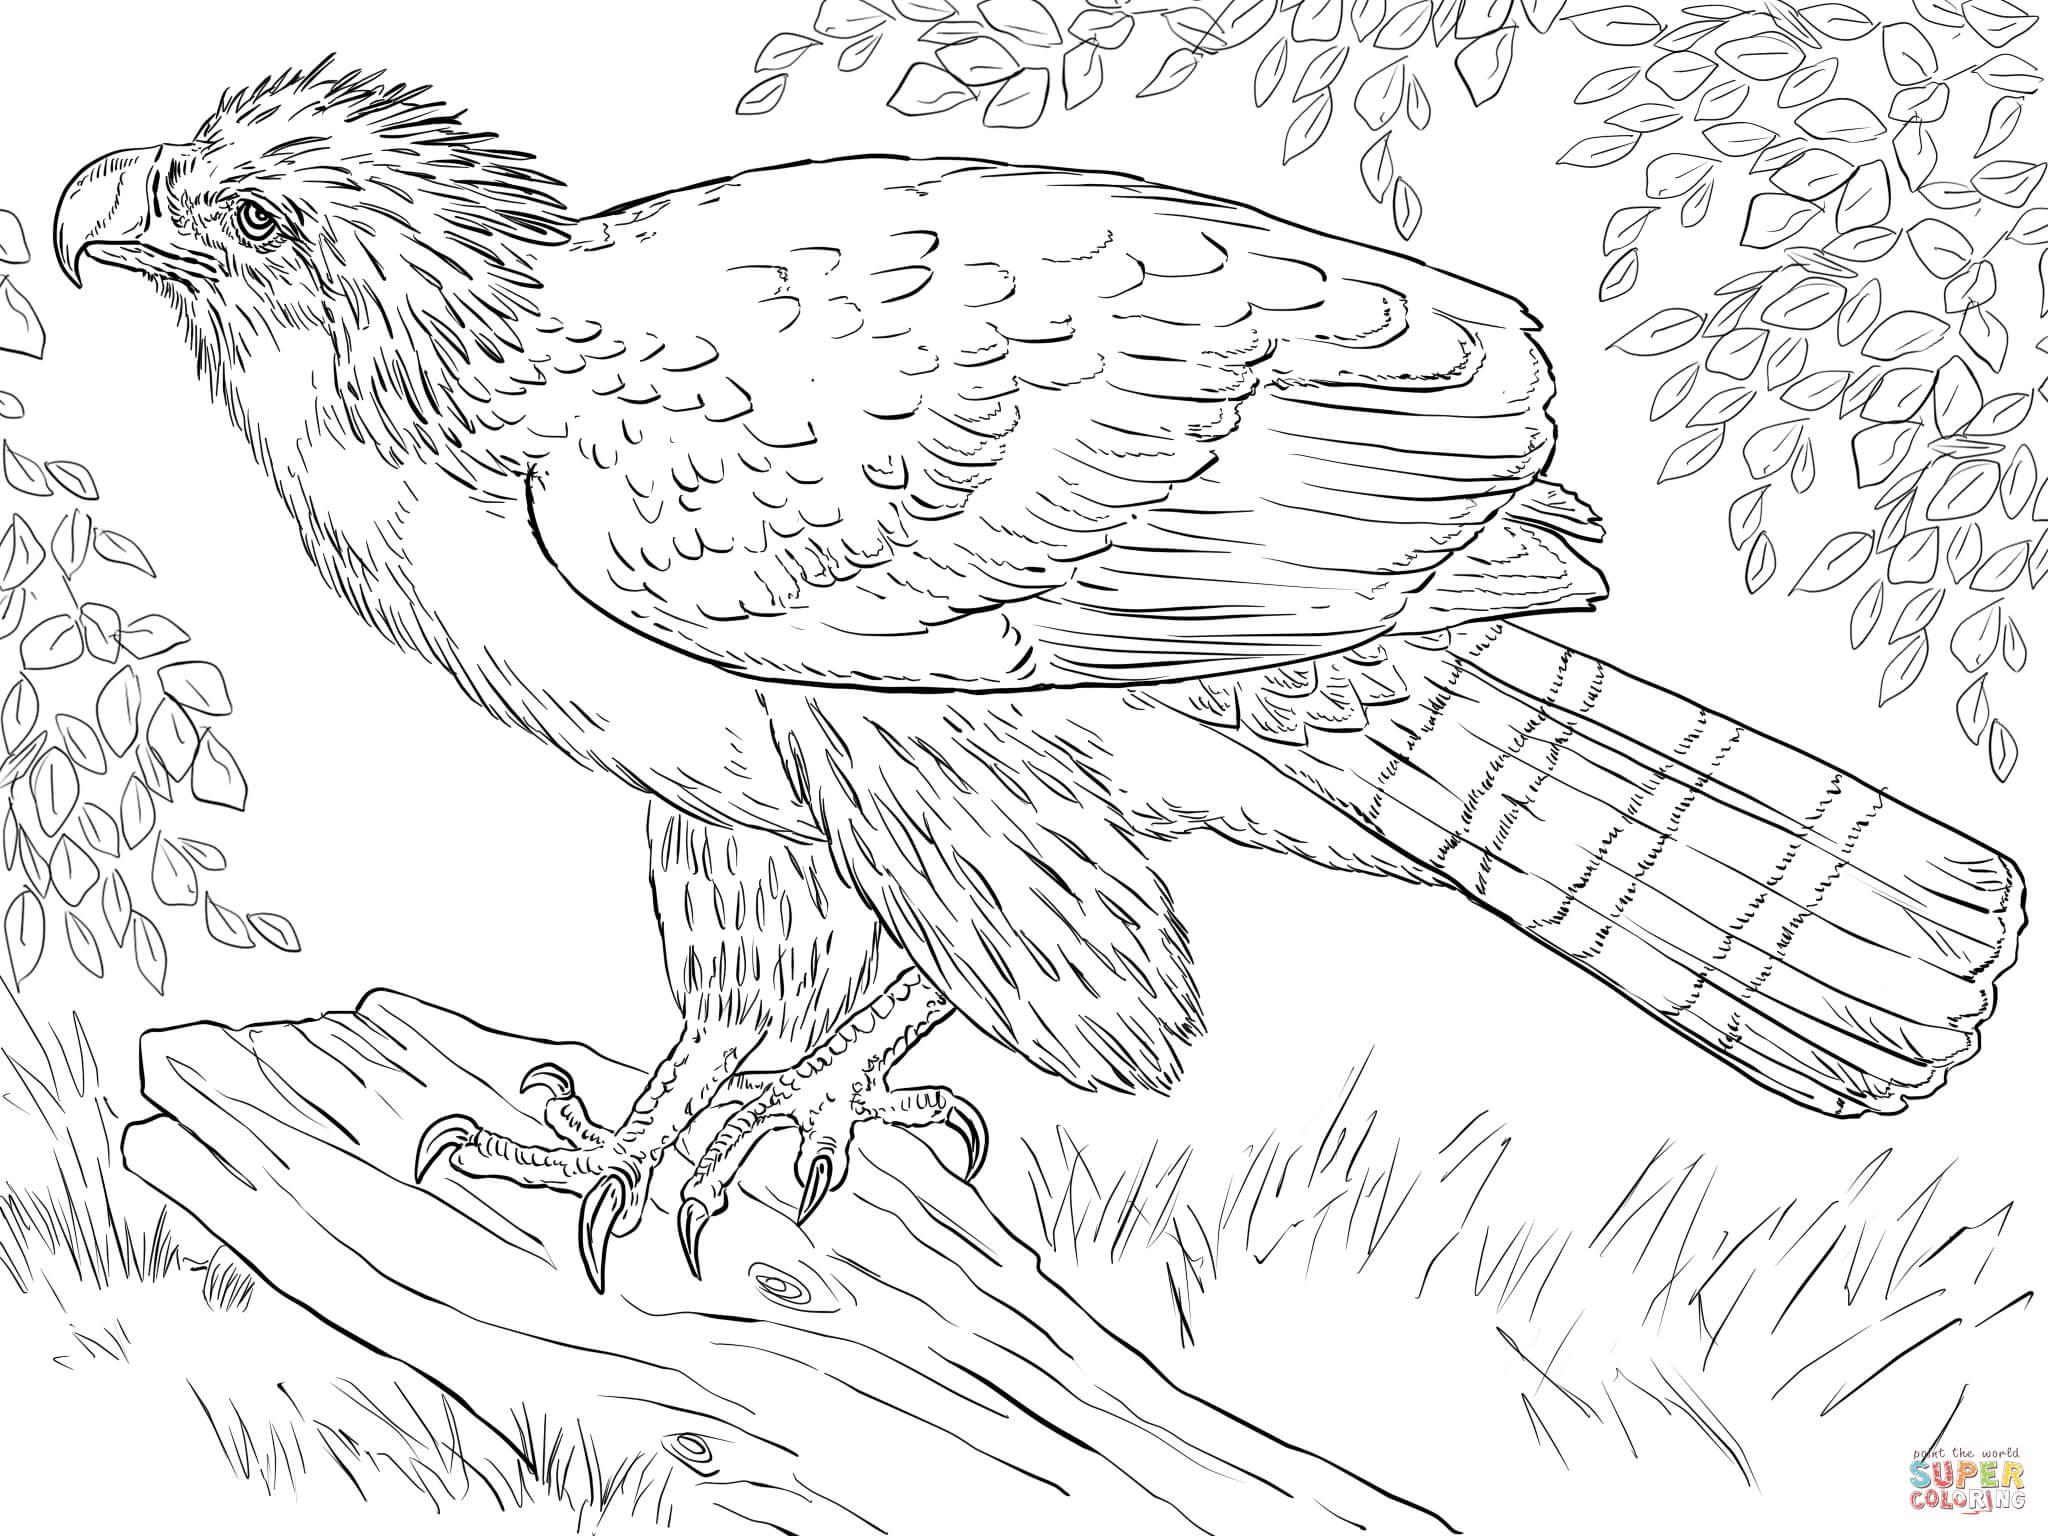 Harpy Eagle coloring, Download Harpy Eagle coloring for free 2019